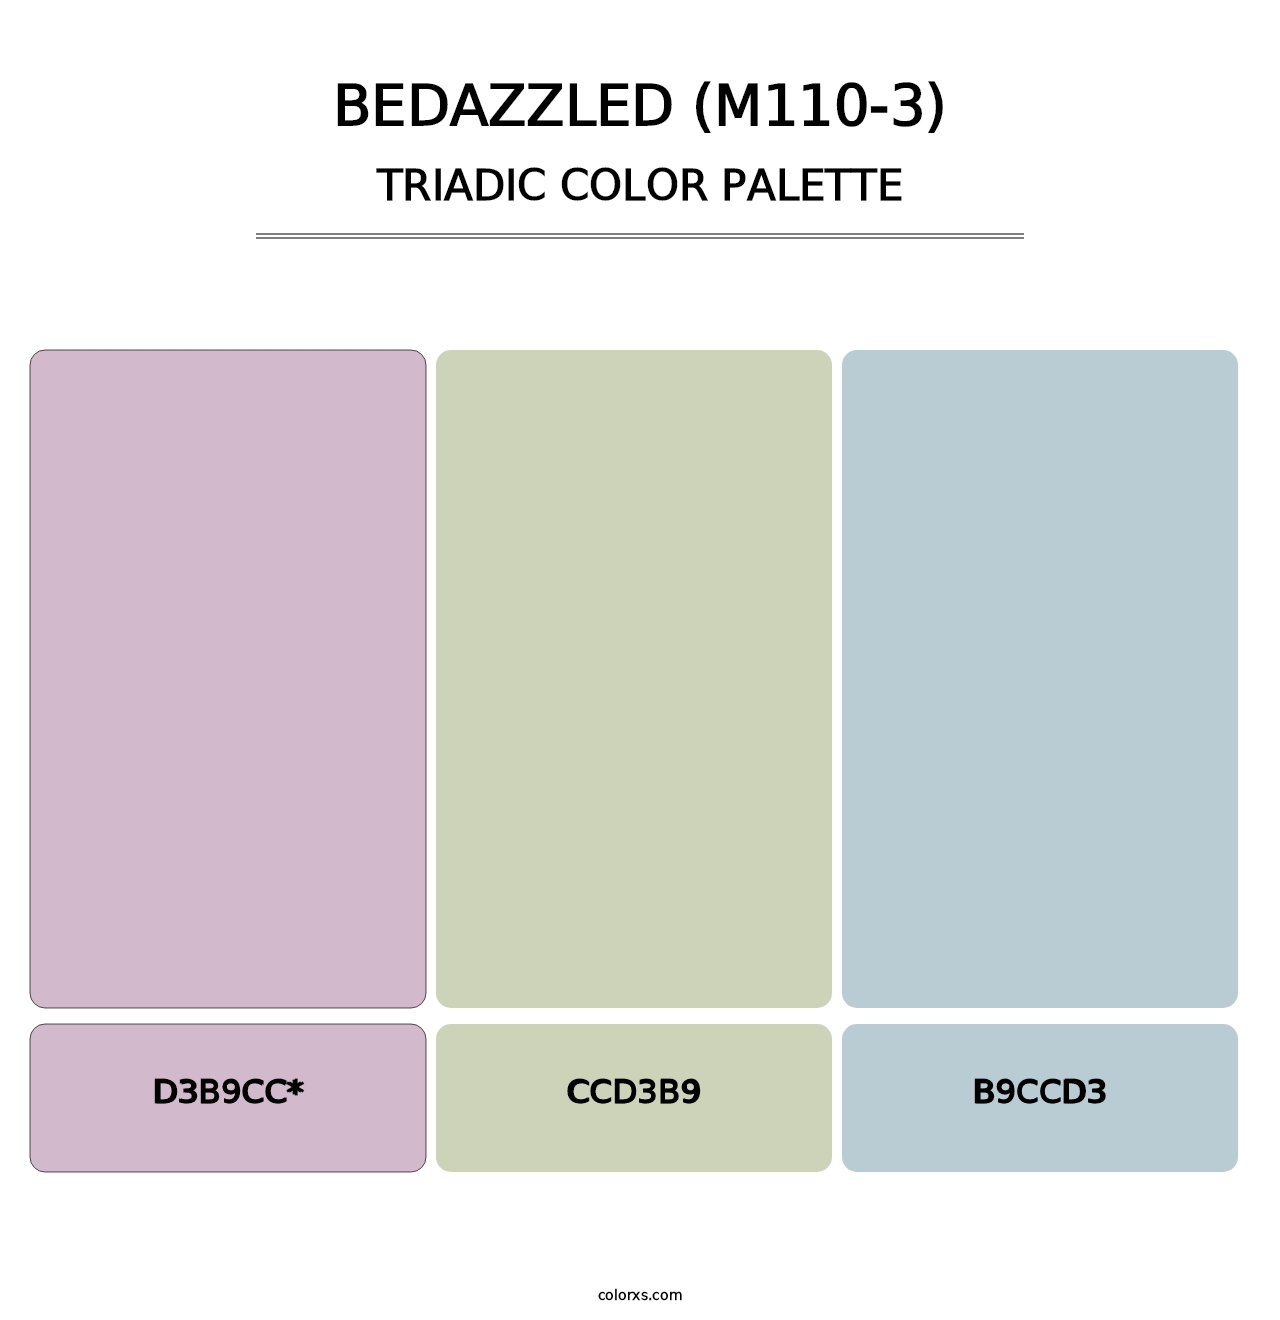 Bedazzled (M110-3) - Triadic Color Palette